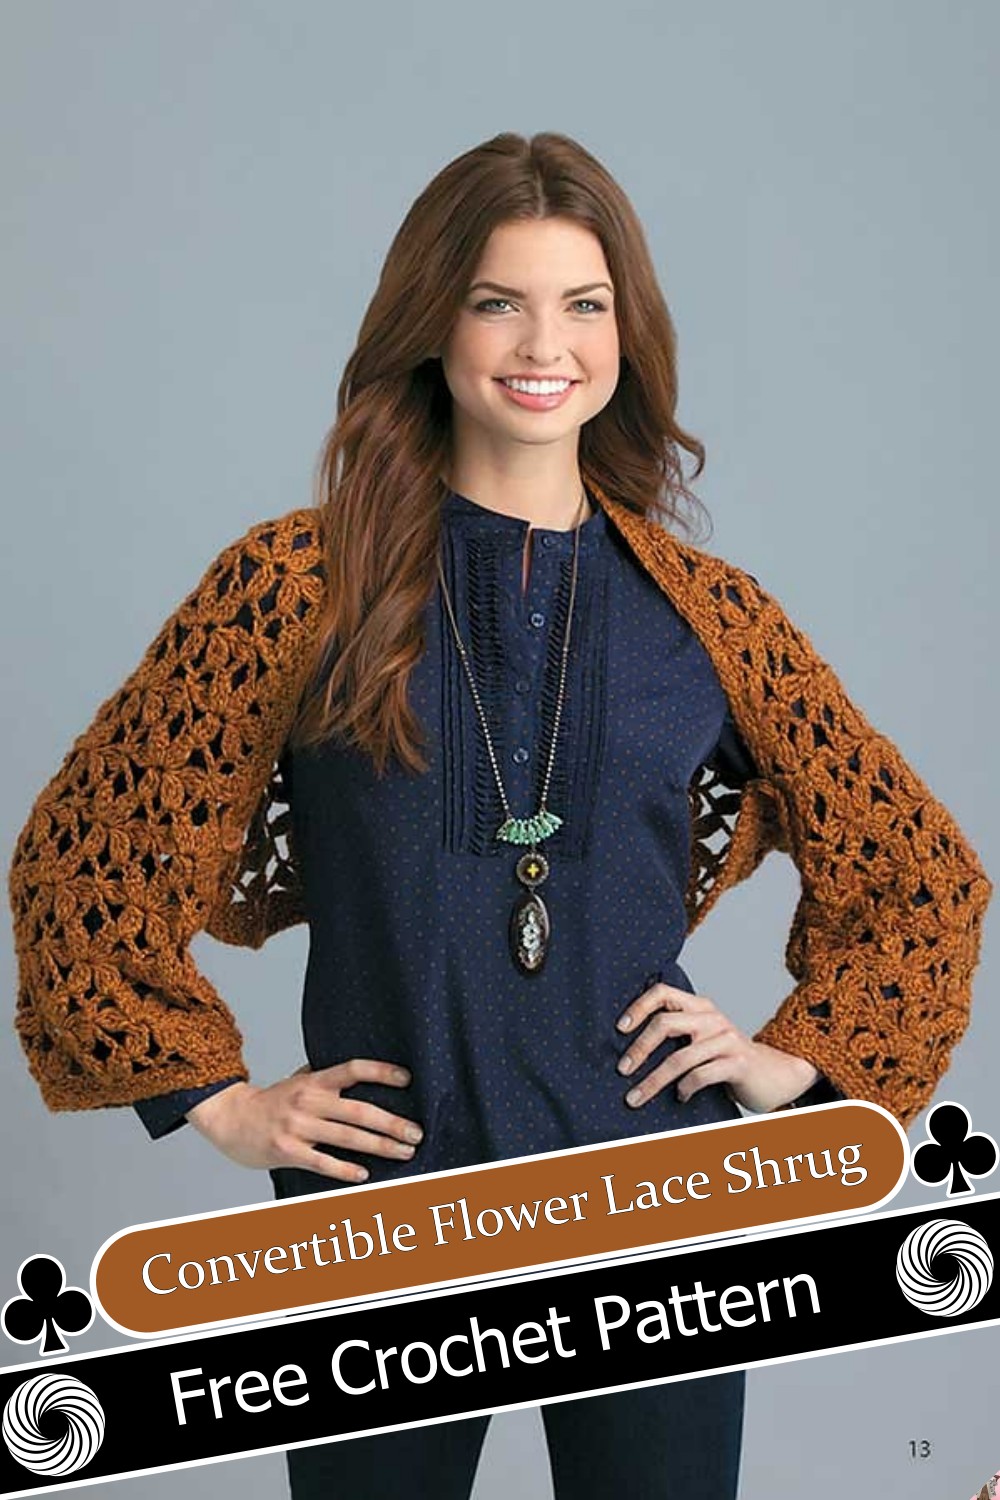 Convertible Flower Lace Shrug